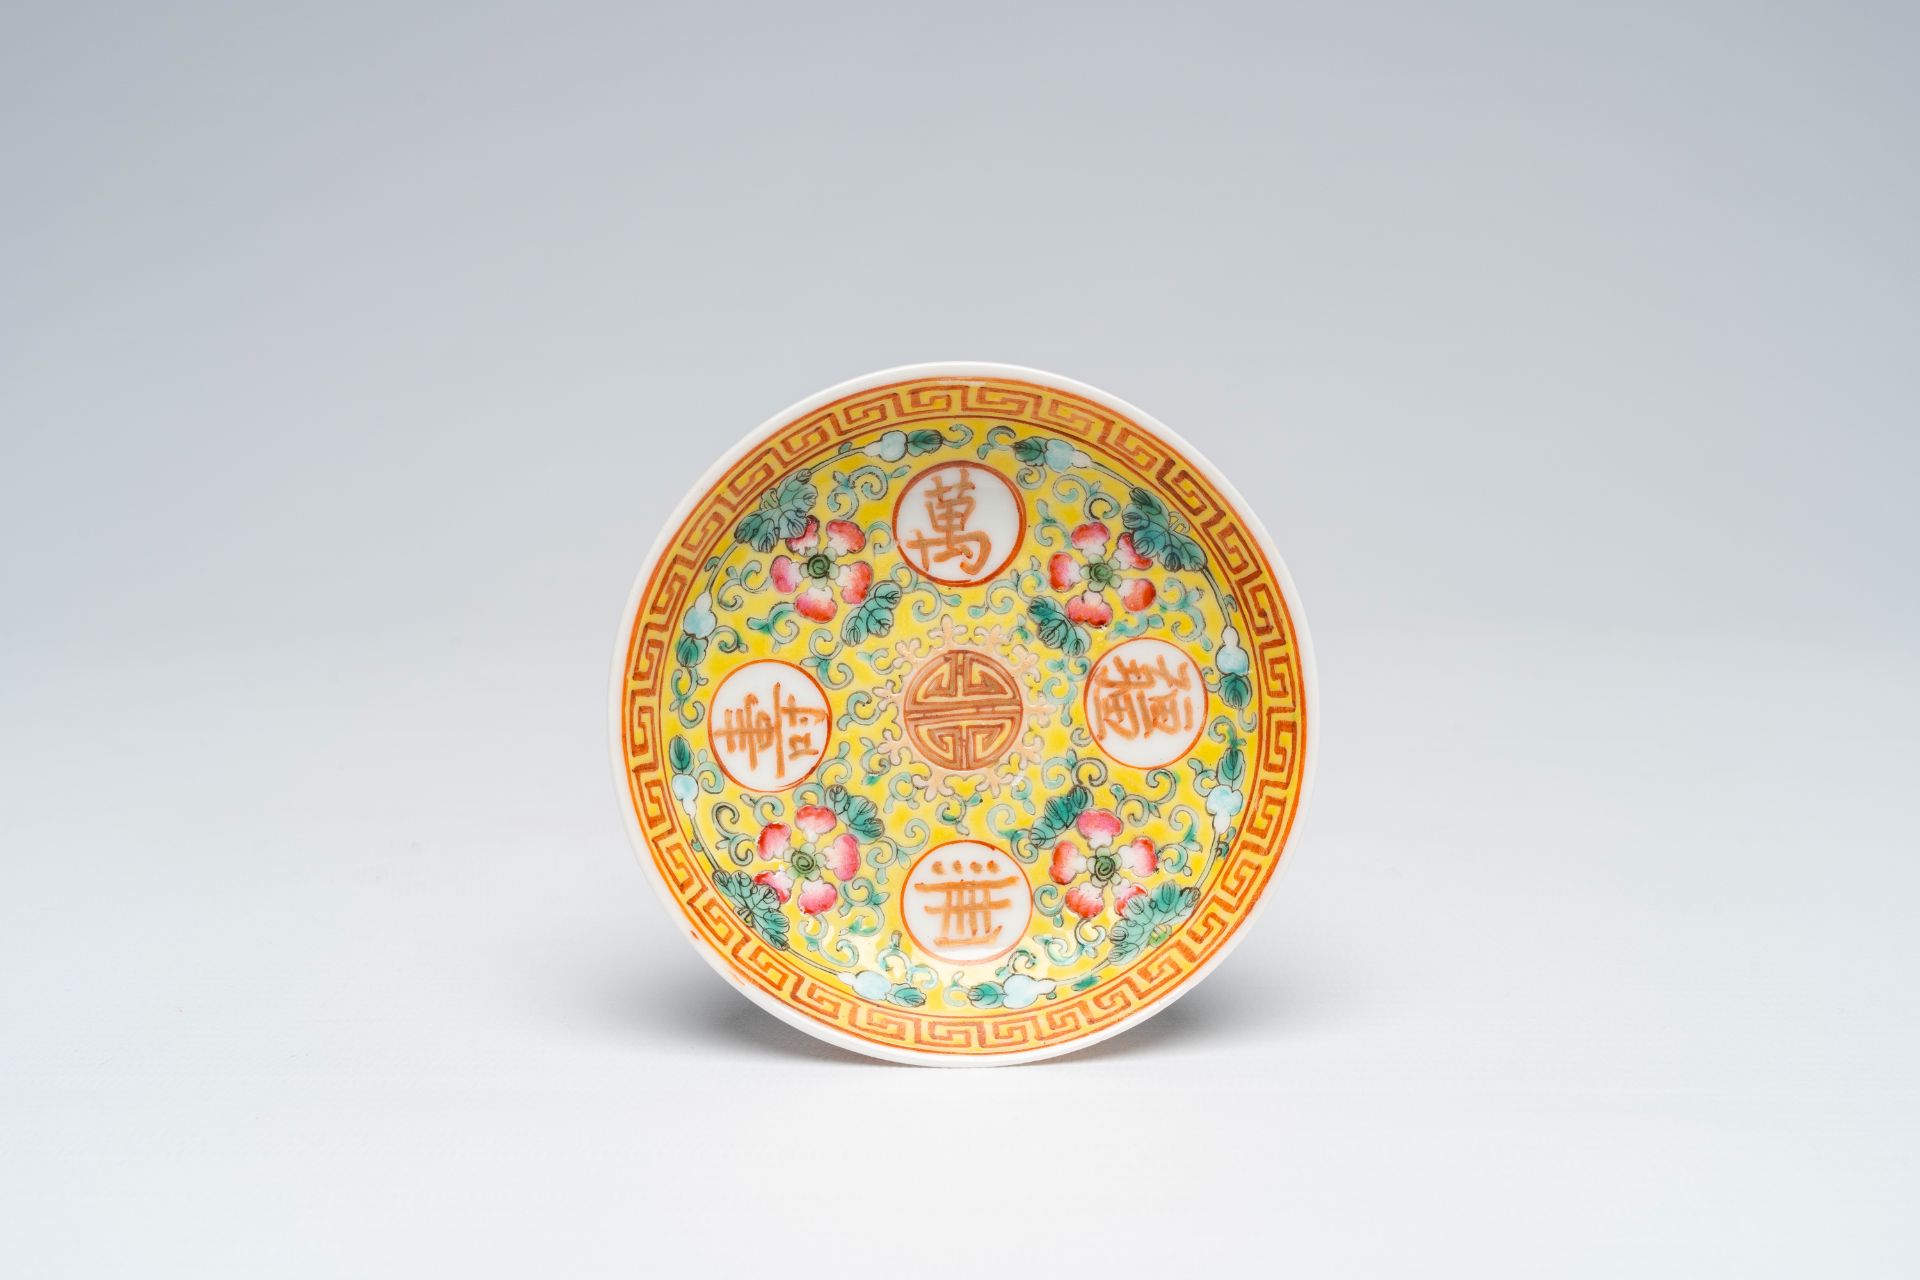 A varied collection of Chinese and Japanese porcelain, 18th C. and later - Image 8 of 9